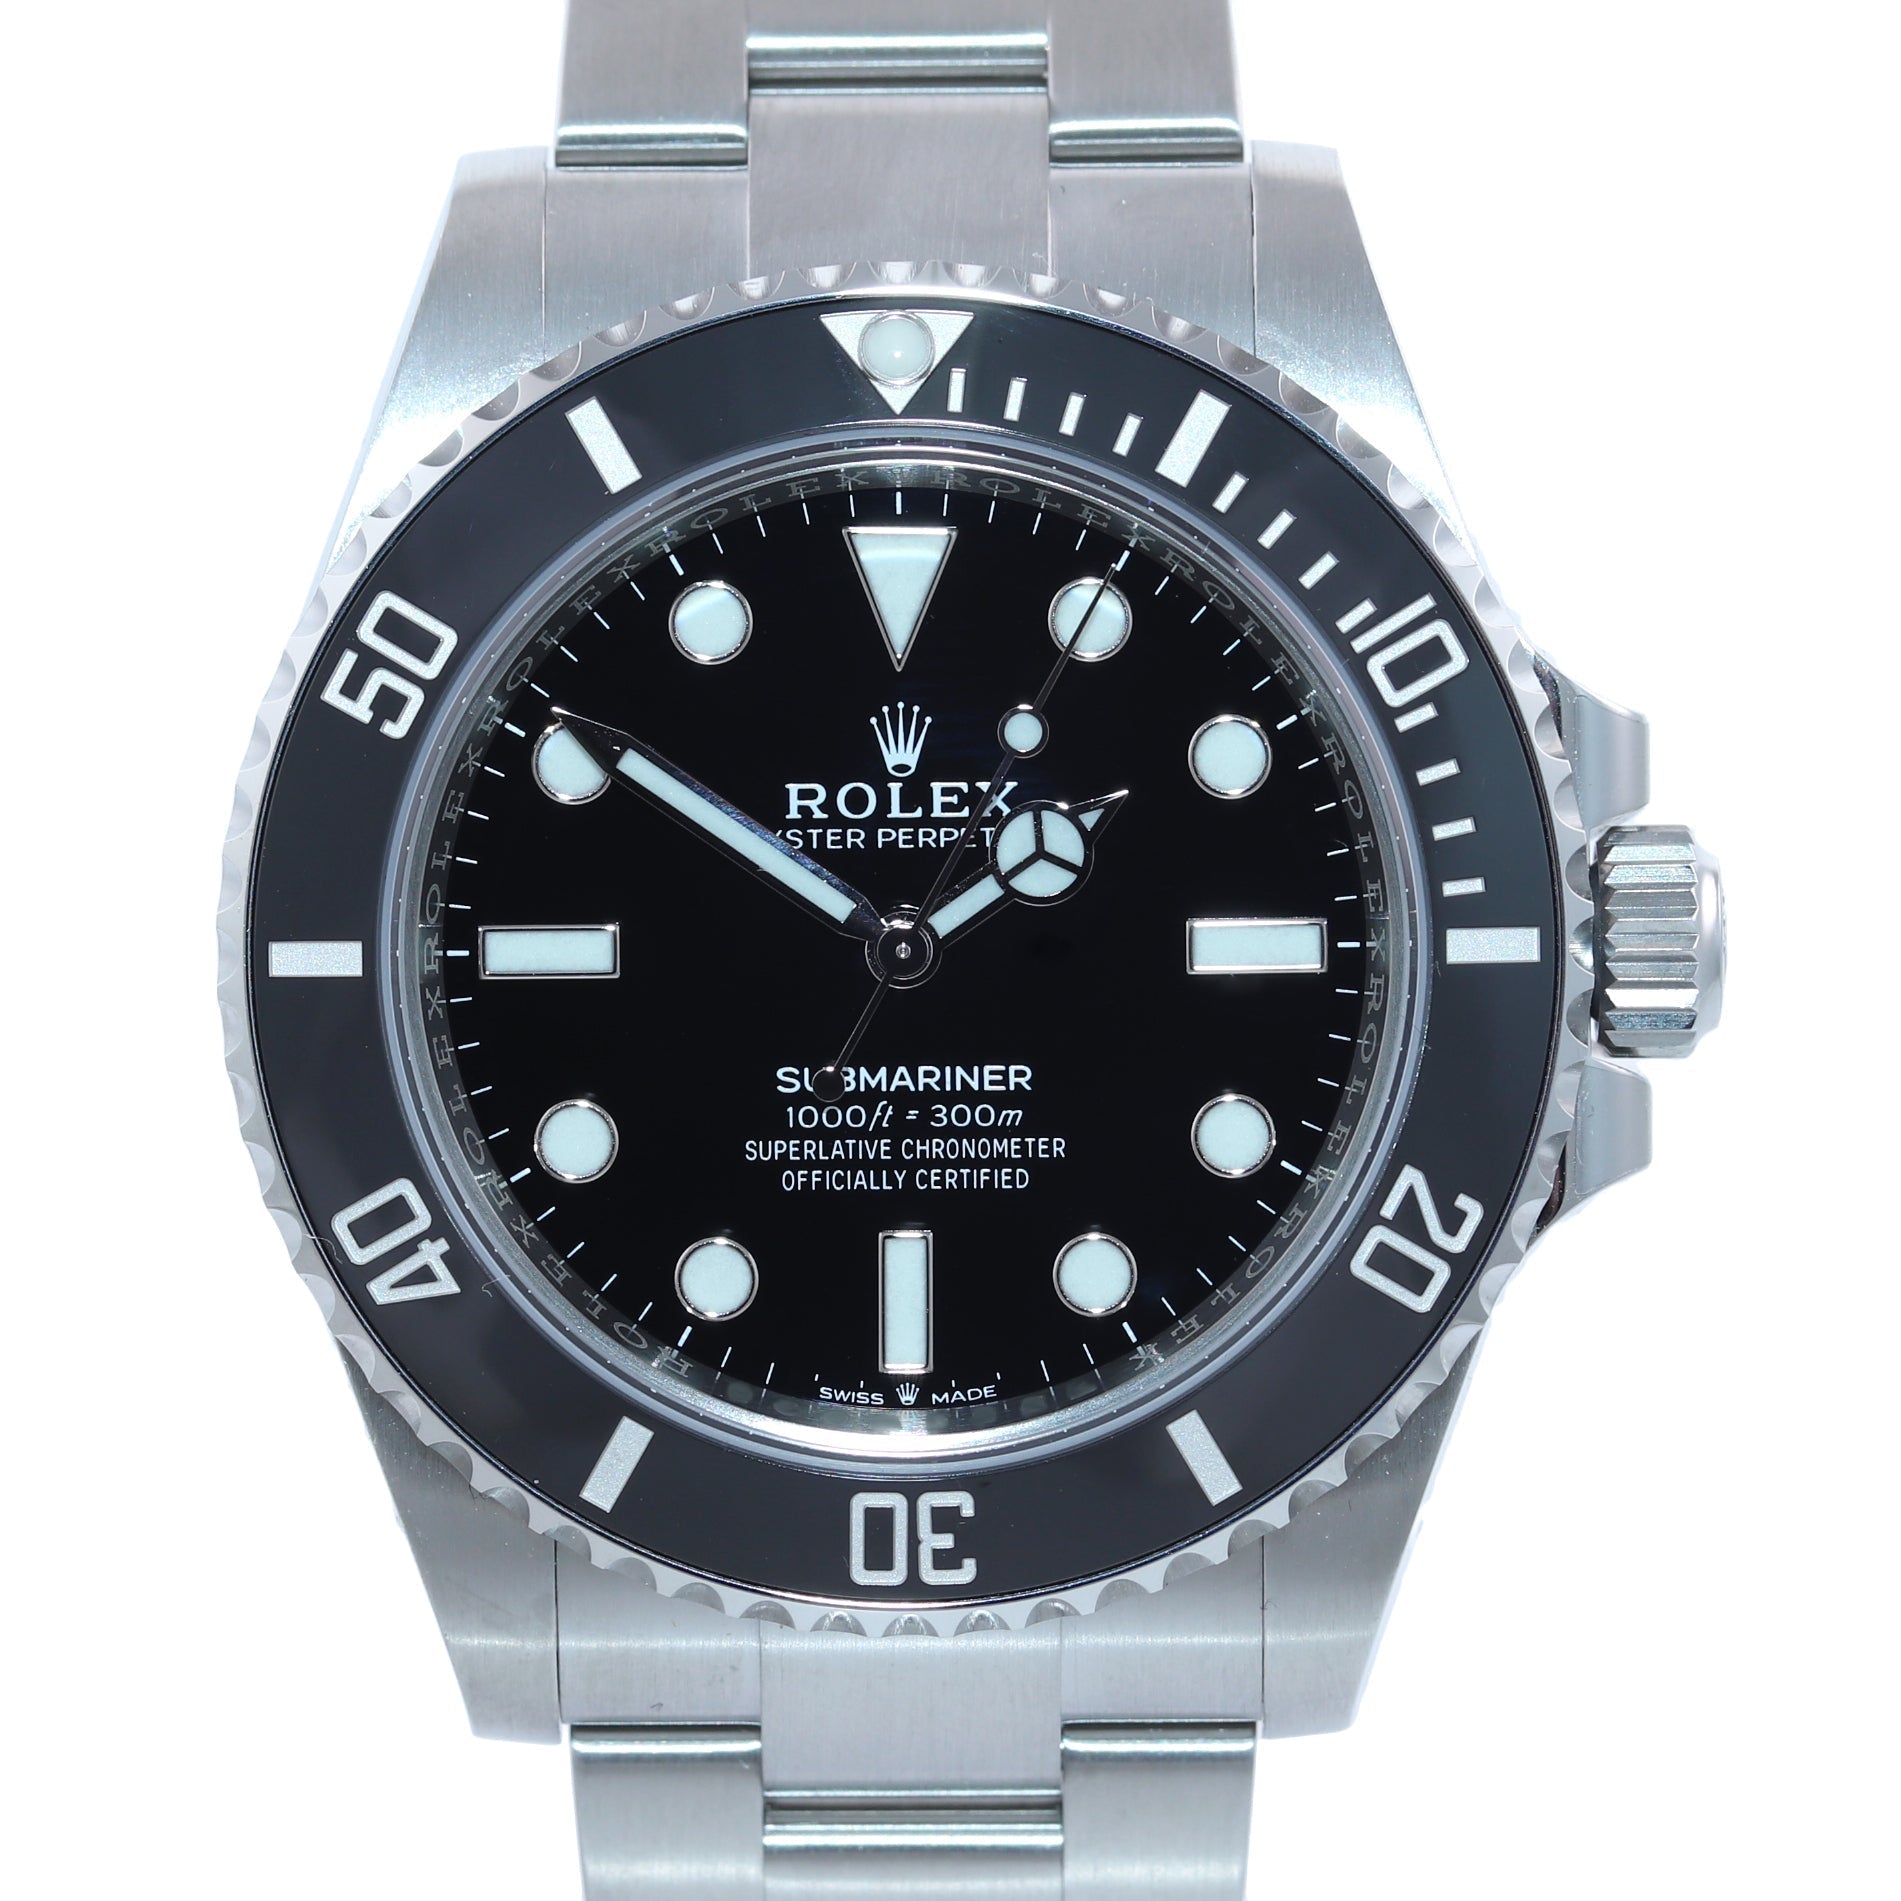 2021 PAPERS Rolex Submariner 41mm Black Ceramic 124060LN No Date Watch Box